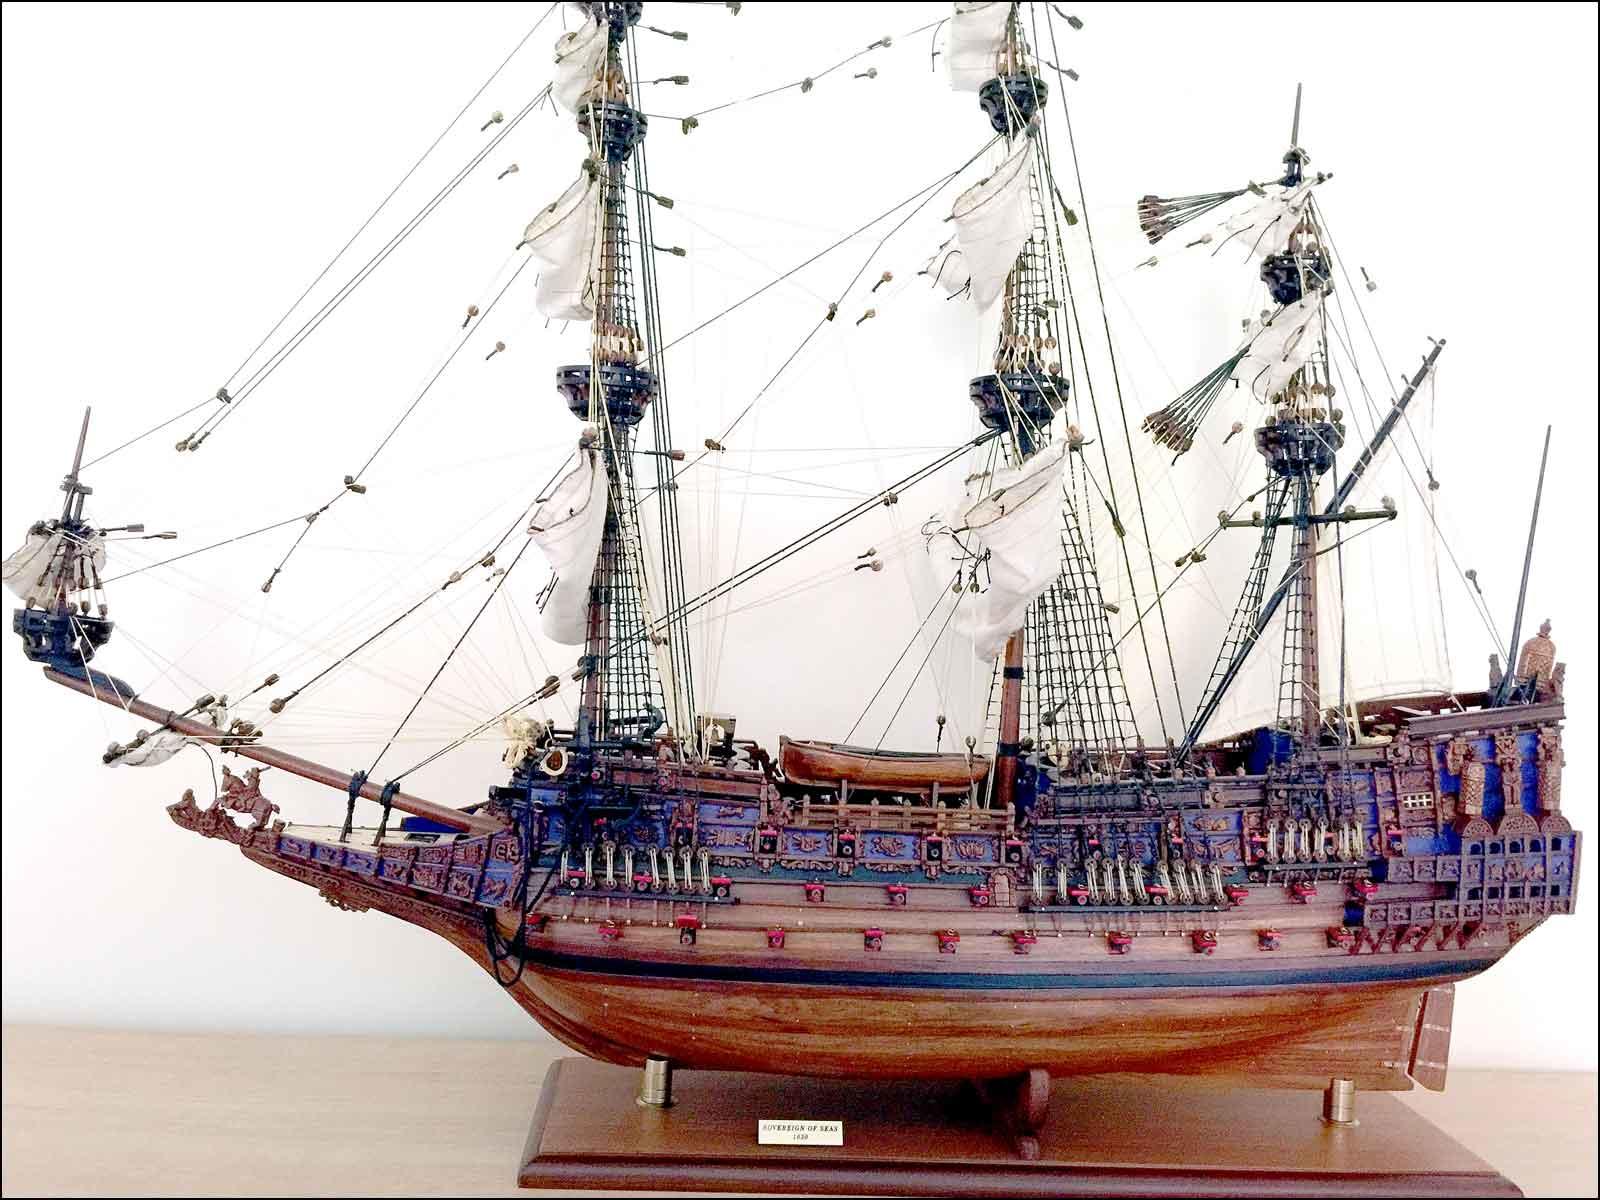 Fully built wooden ship model in large scale